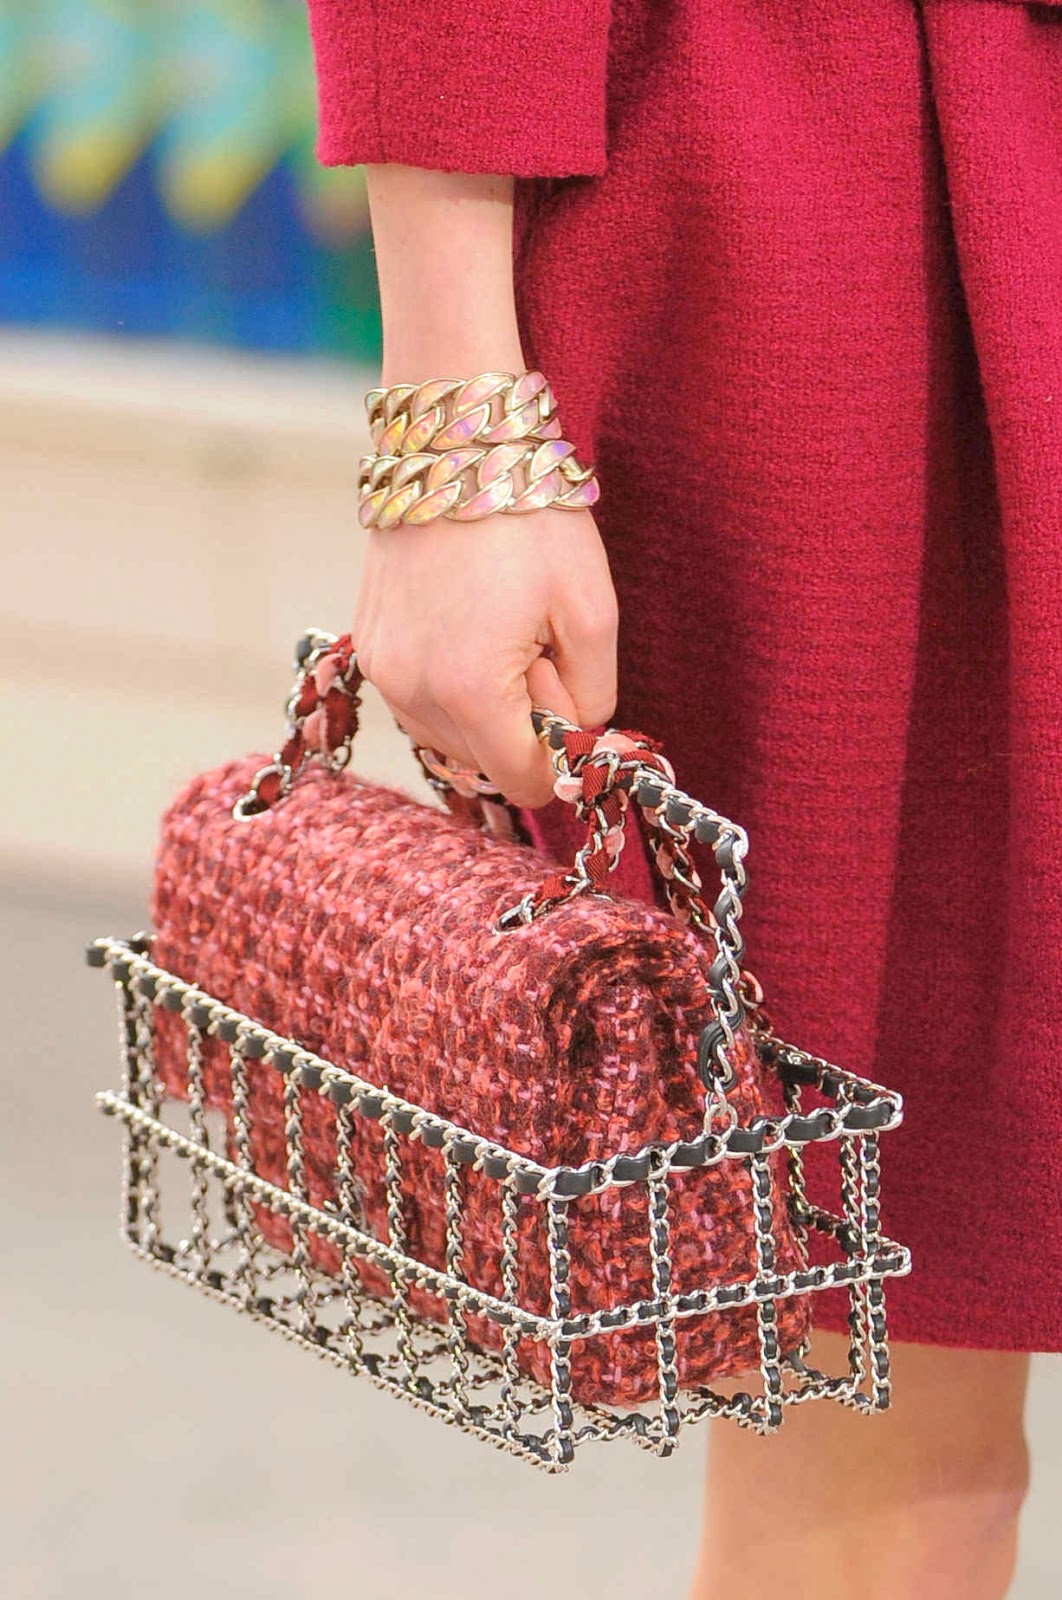 AMORE (Beauty + Fashion): CHANEL – AW 14/15 Bags and Accessories